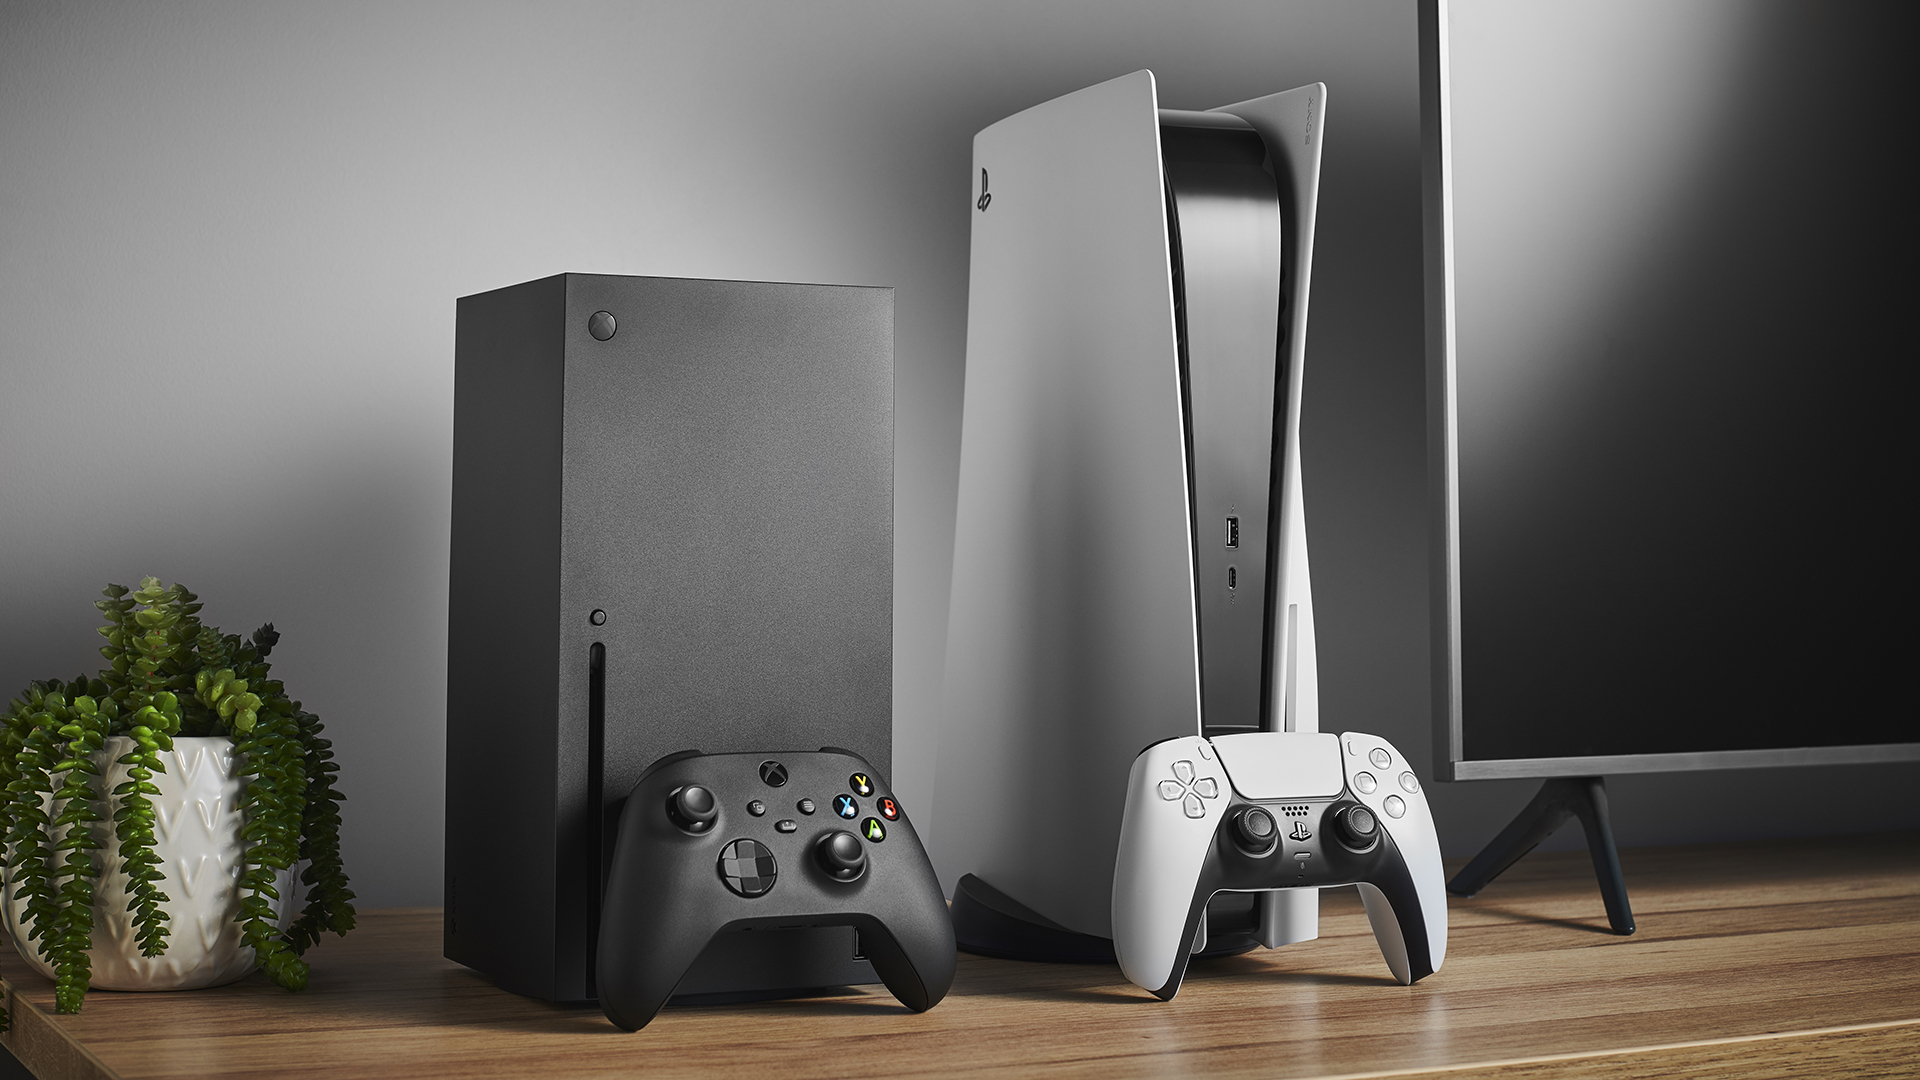 PS5 vs Xbox Series X: which is better? | What Hi-Fi?